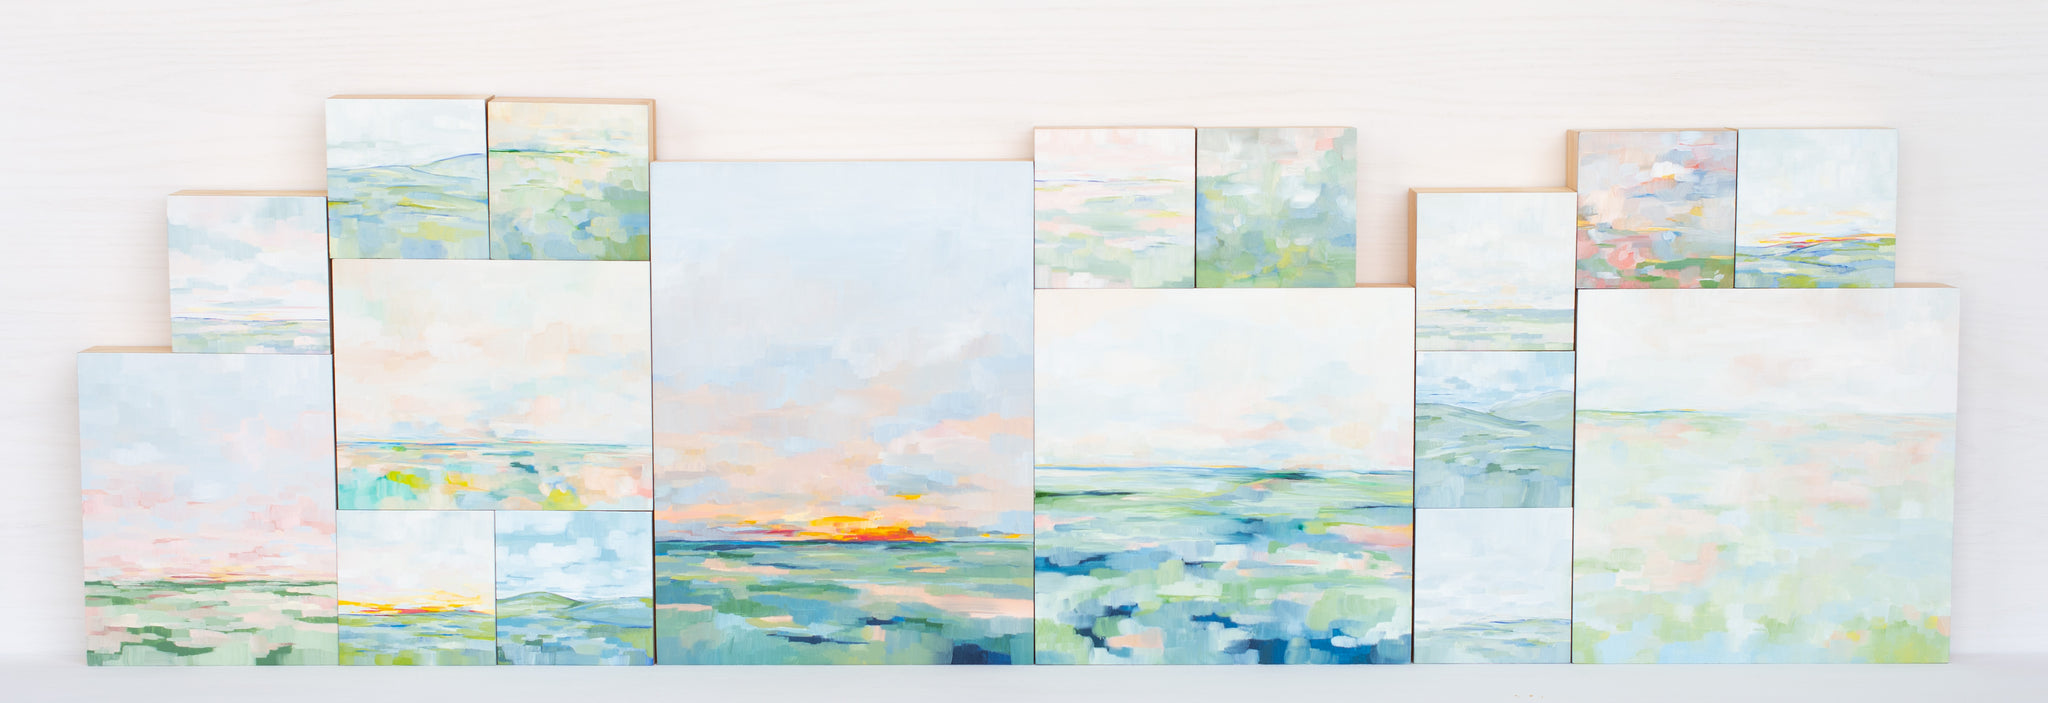 A Few Mornings Later - Diptych of Two 5x5"